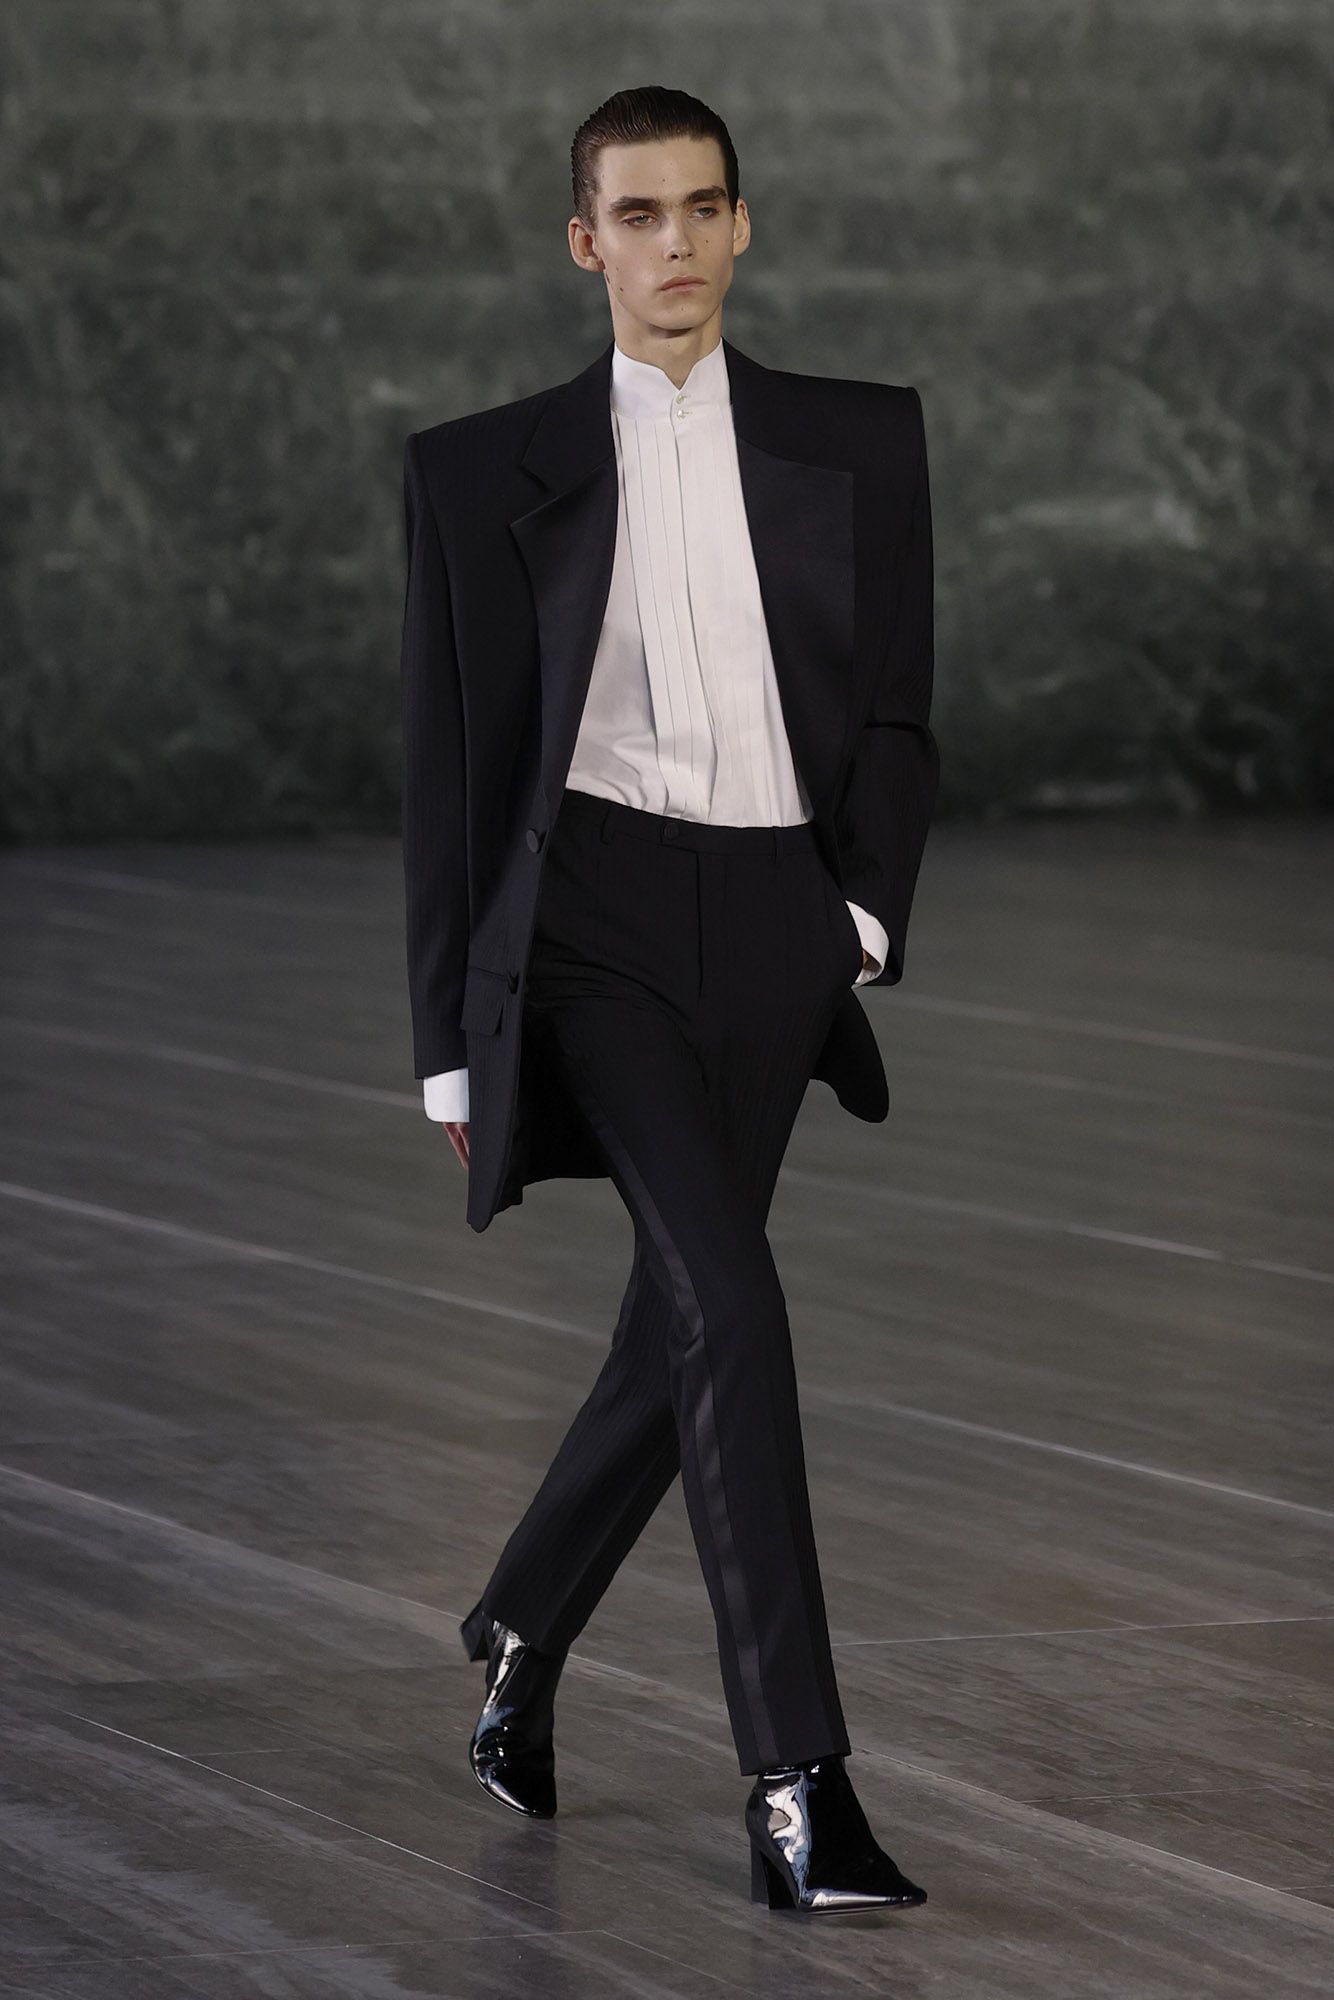 Saint Laurent Spring/Summer 2024 male model in suit with exaggerated shoulders and white button down on runway